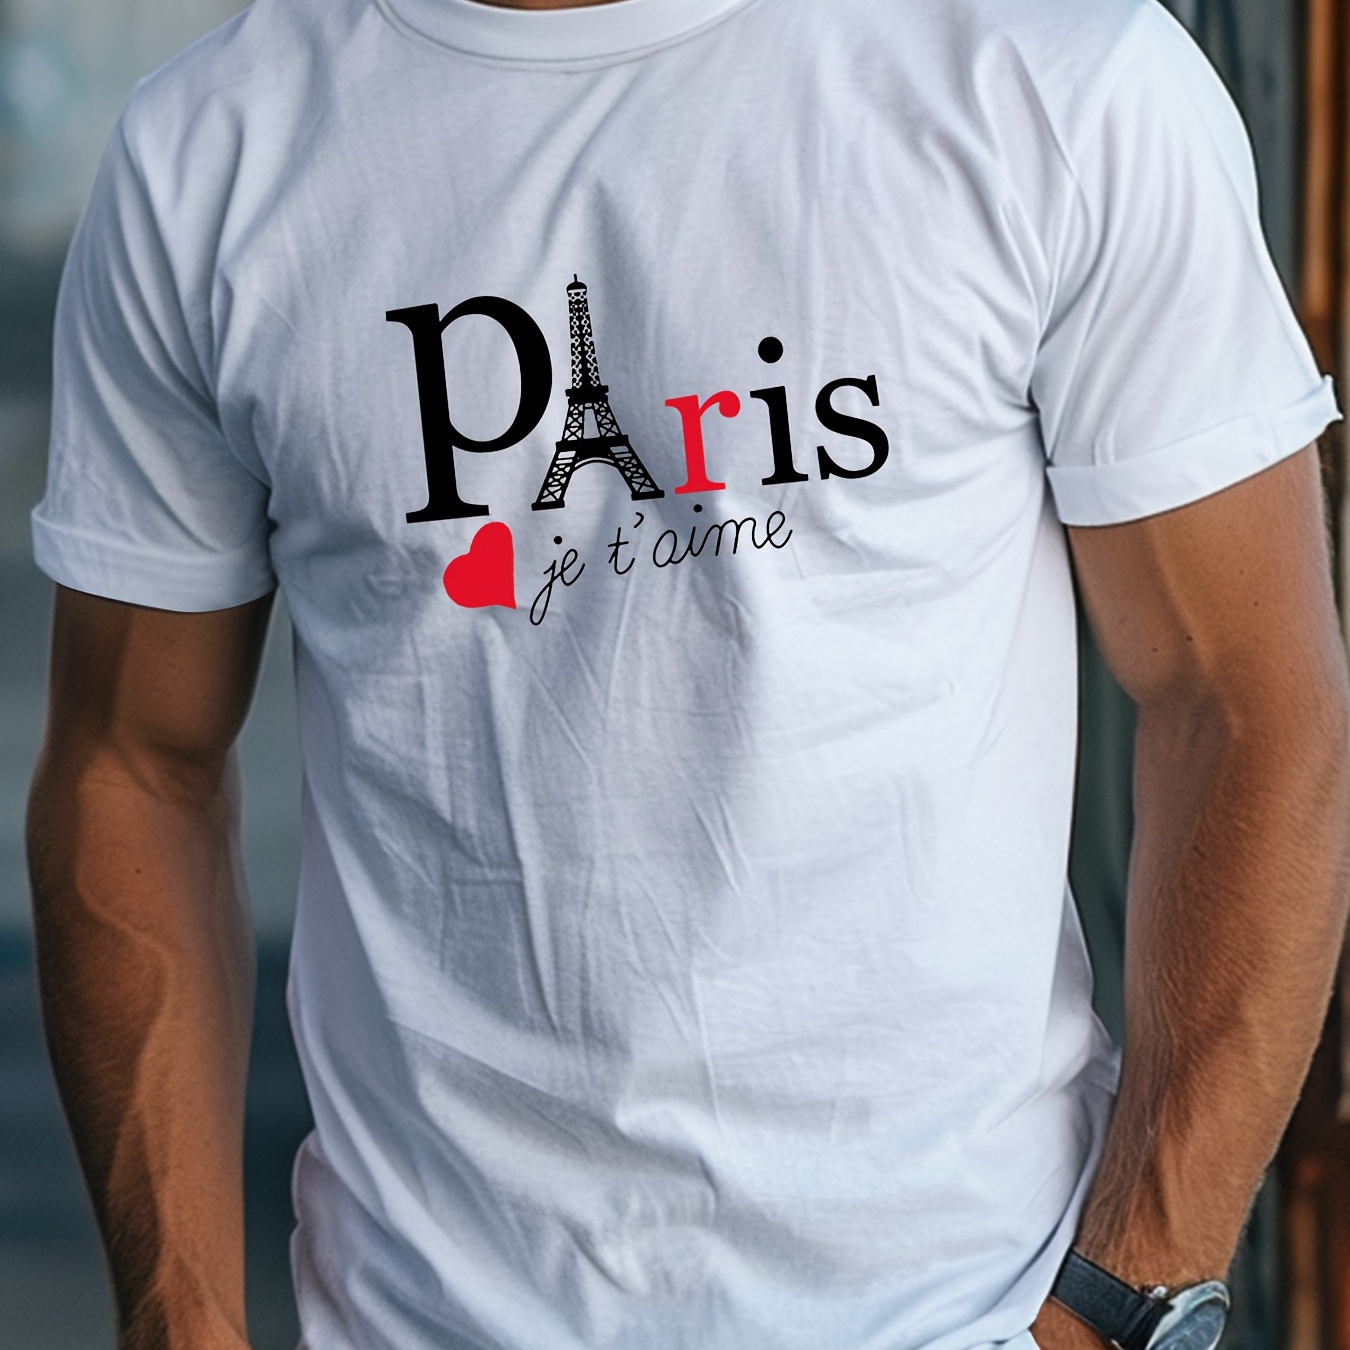 

Eiffel Tower Psris Printed Summer Short-sleeved 220g Pure Cotton T-shirt Regular For Both Men And Women, Can Be Paired With Couples Combed Cotton T-shirt